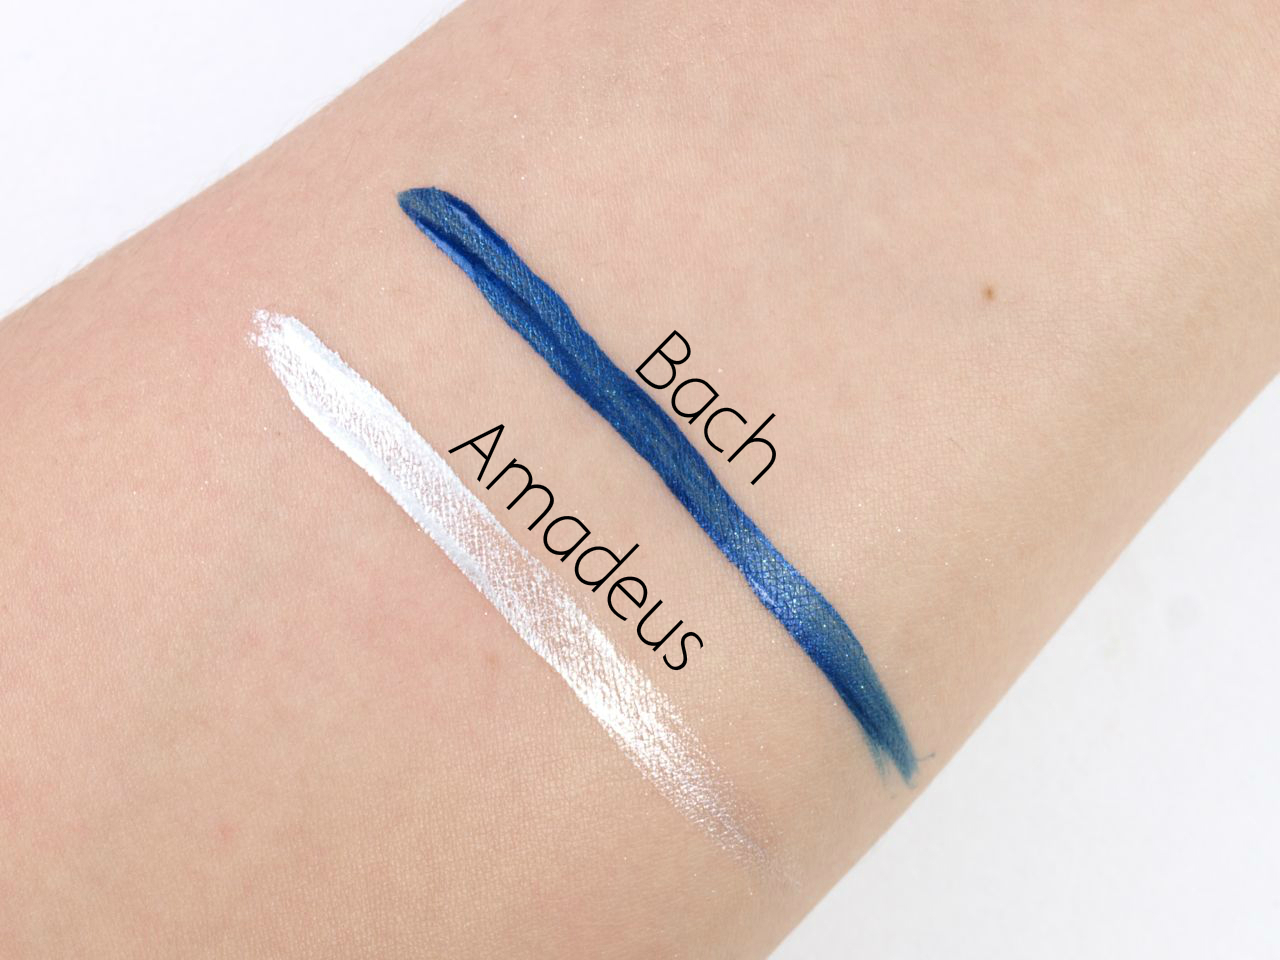 Kat Von D Lightning Liner Metallic Eyeliner in "Bach" & "Amadeus": Review and Swatches